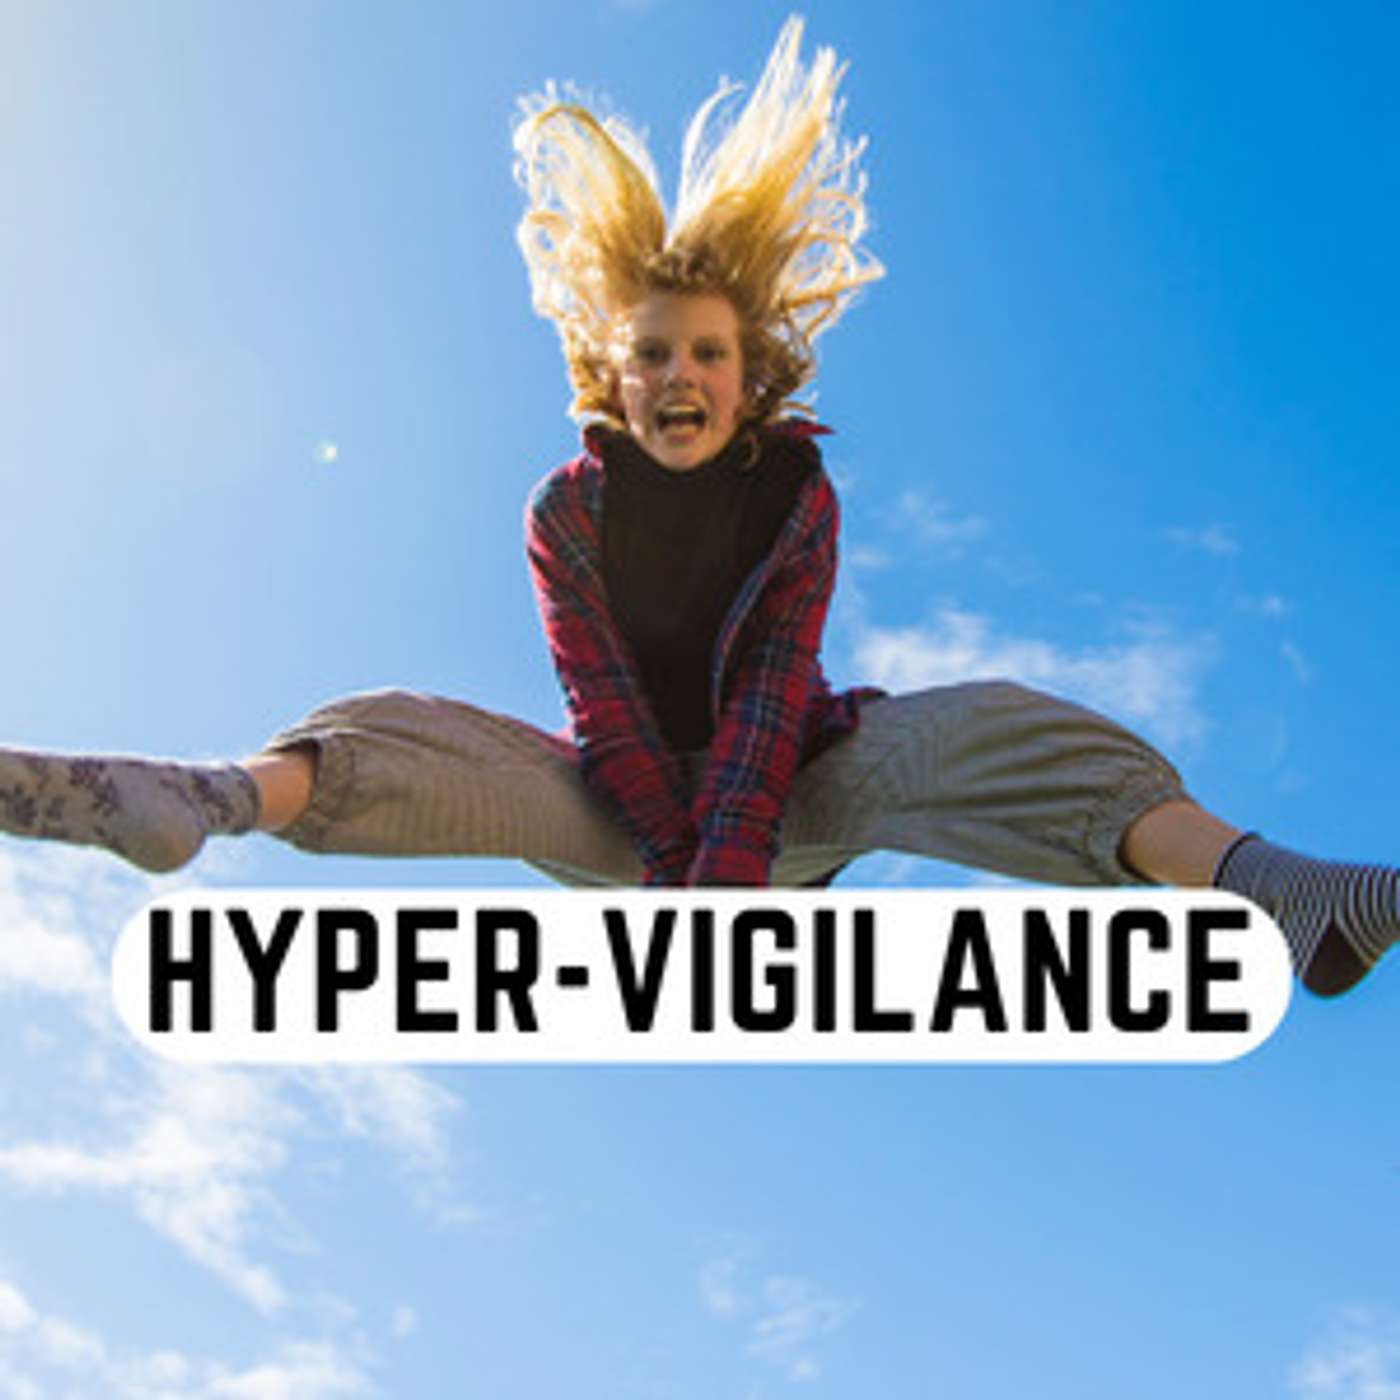 Hyper-Vigilance: Is it Connected to Narcissistic Trauma? Let's Explore...